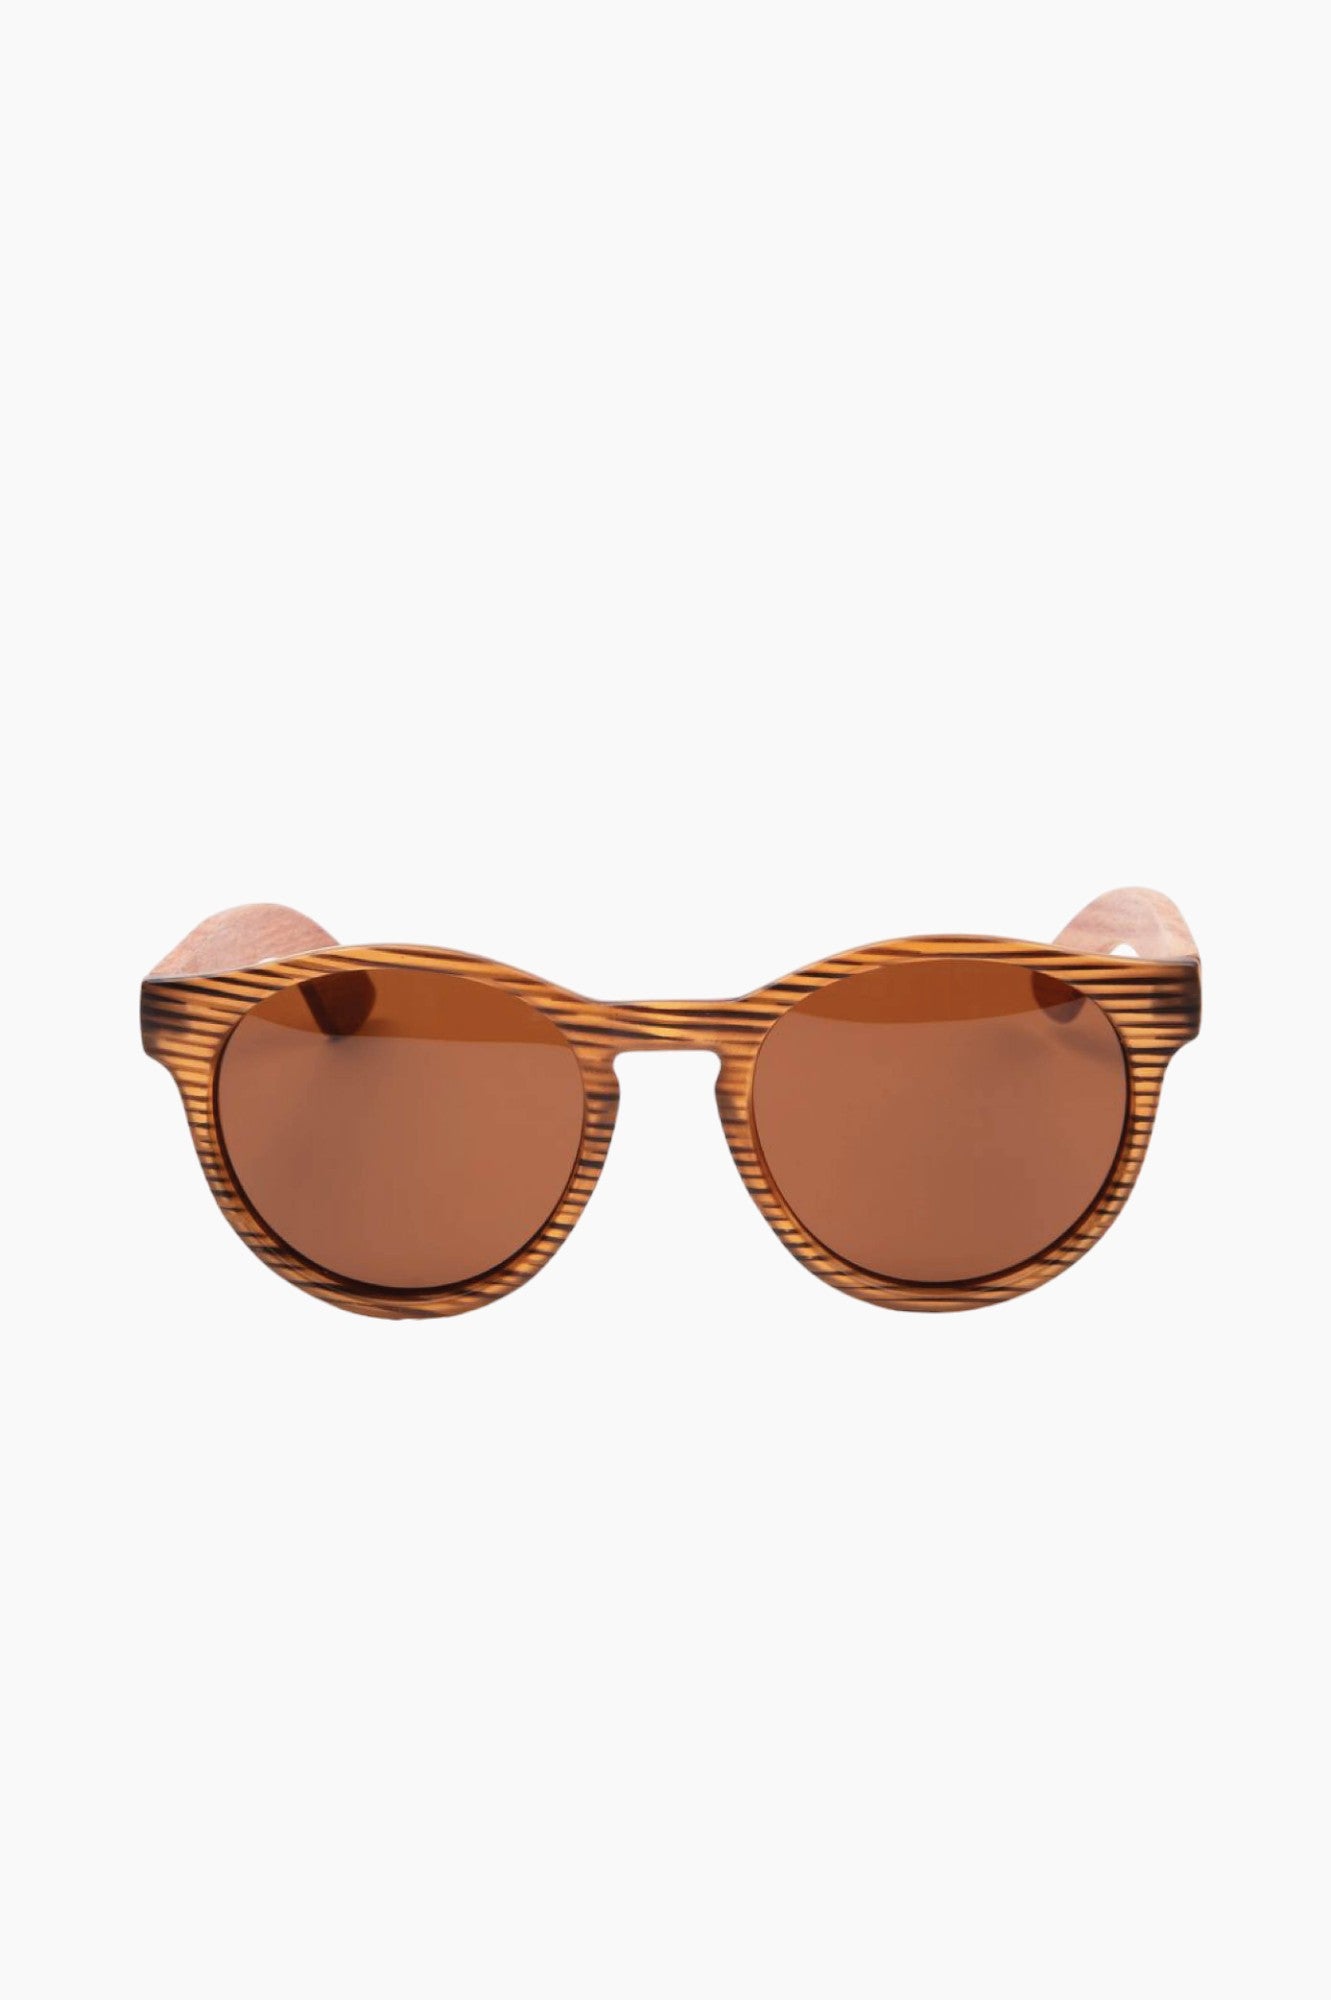 Front view of round, wood-looking sunglasses.